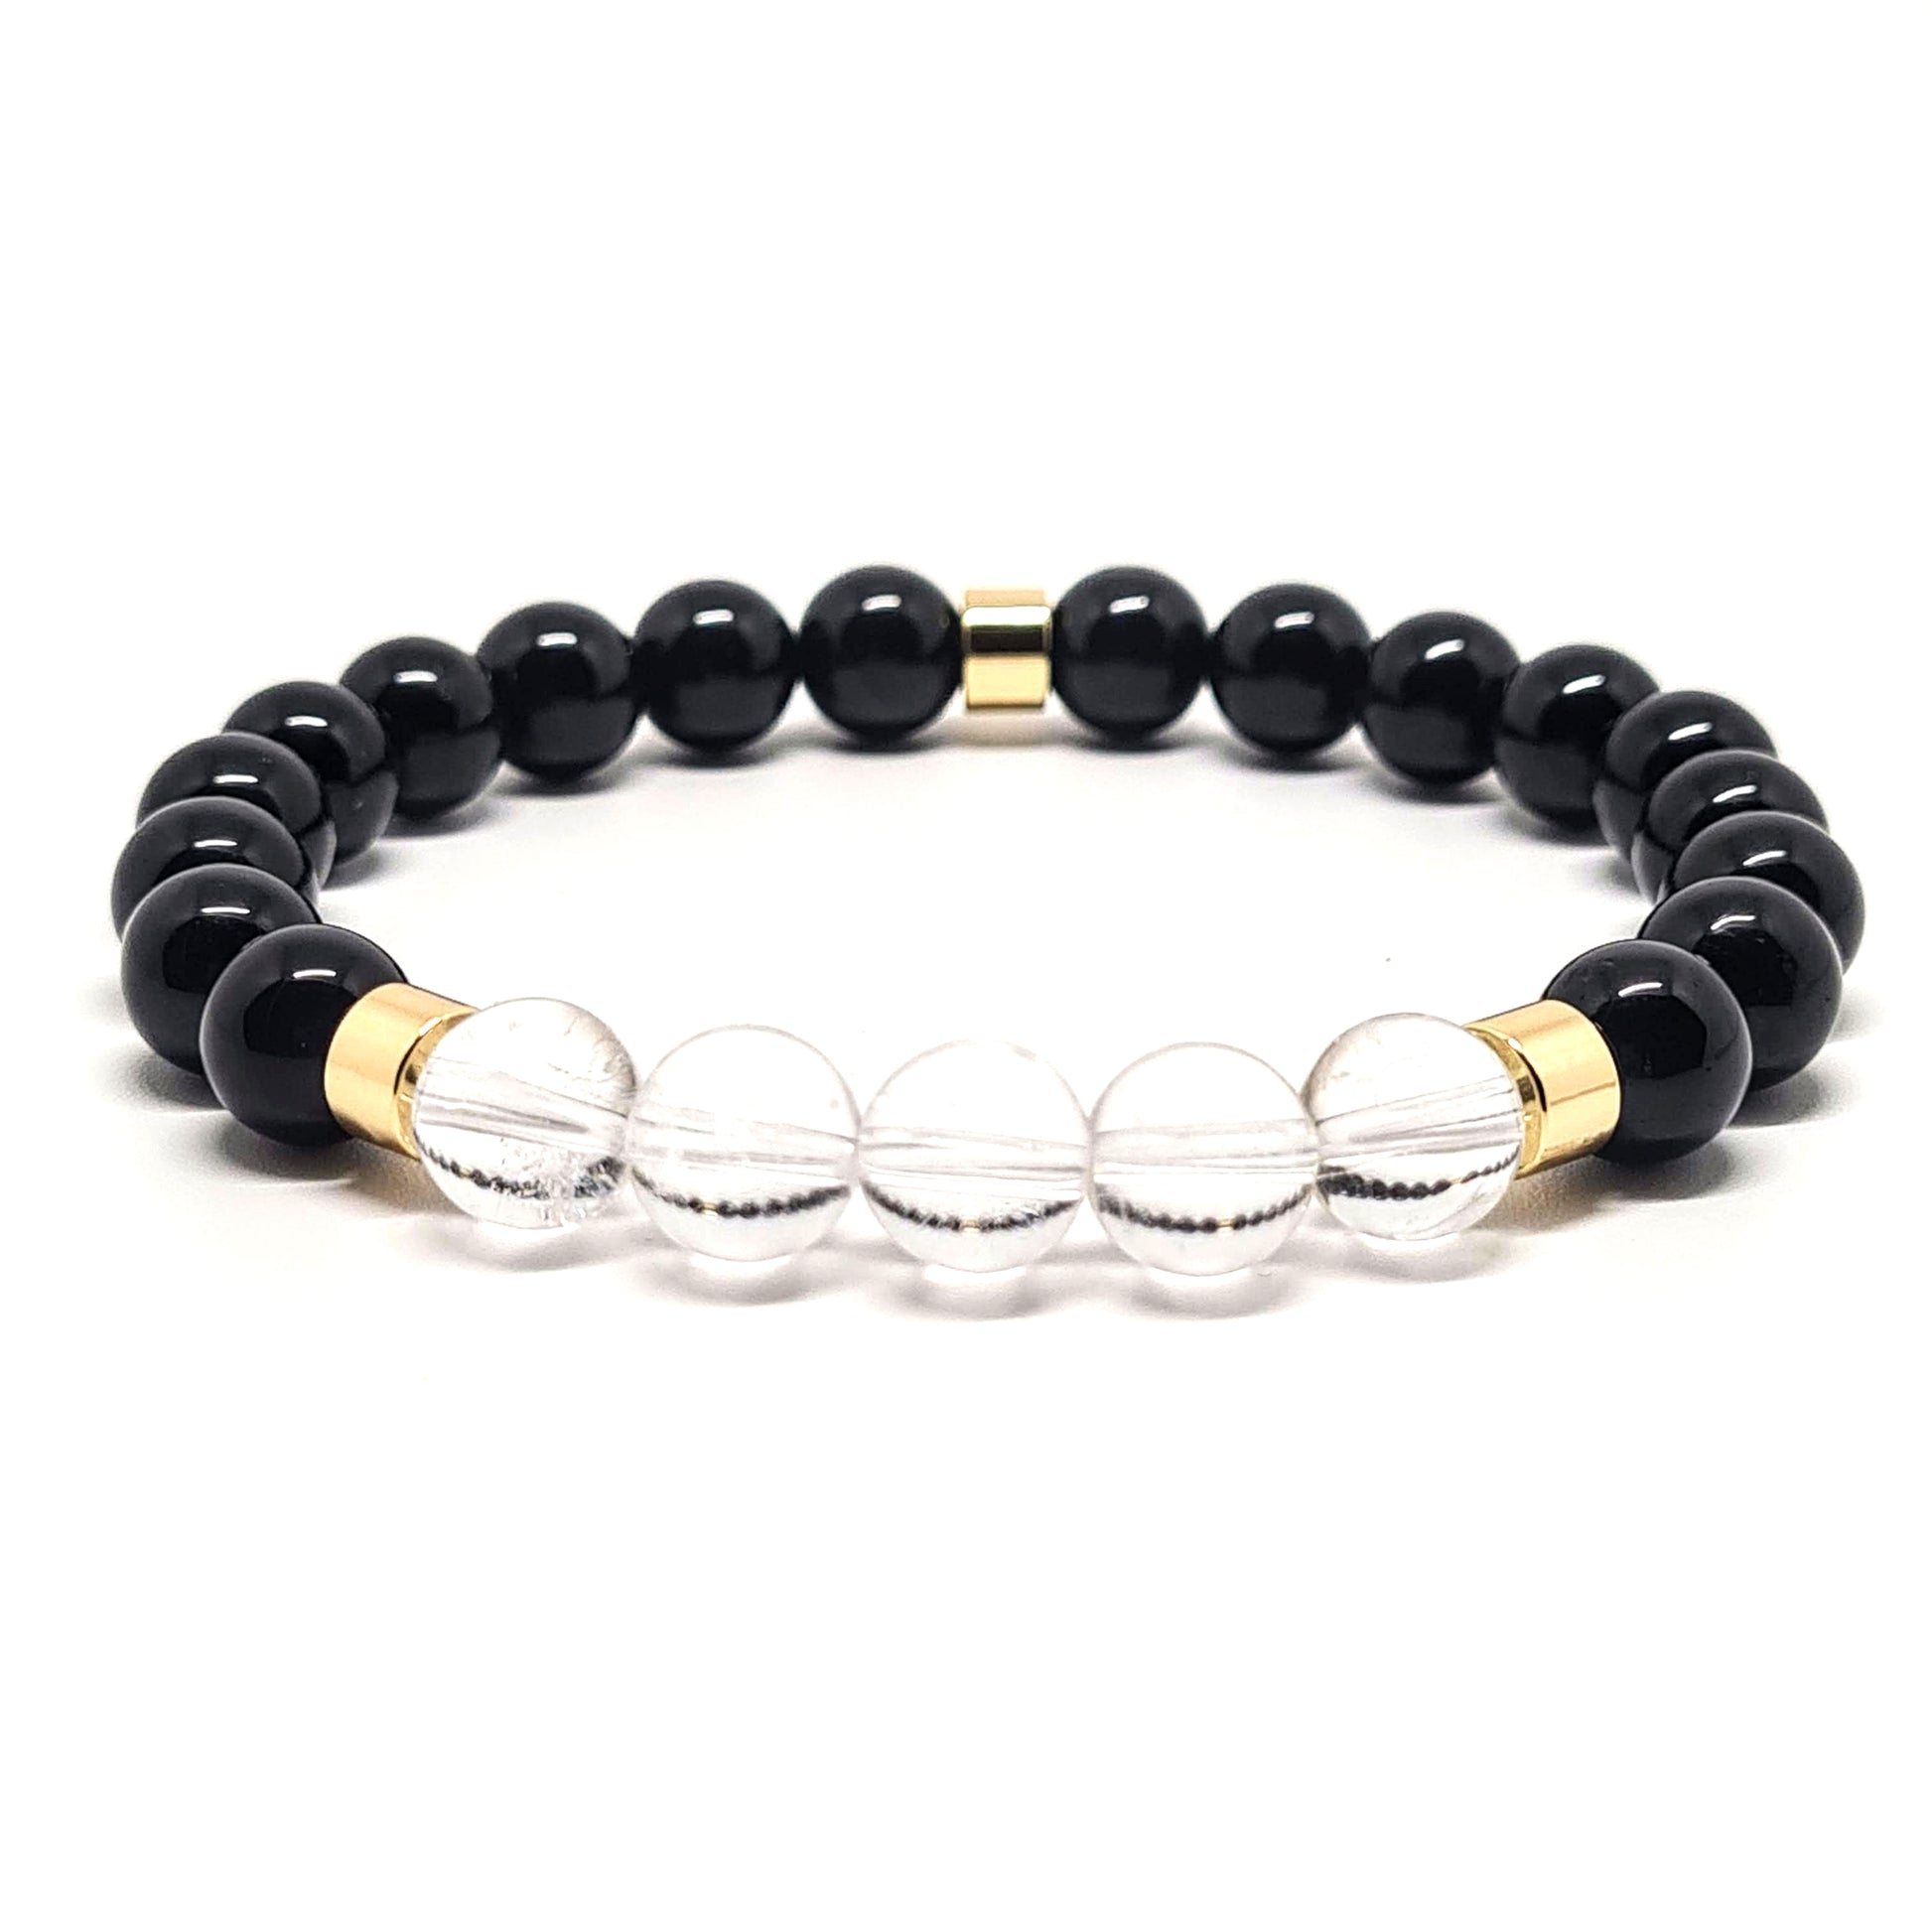 Black Tourmaline and Clear Quartz Gemstone bracelet with 18ct gold plated accessories